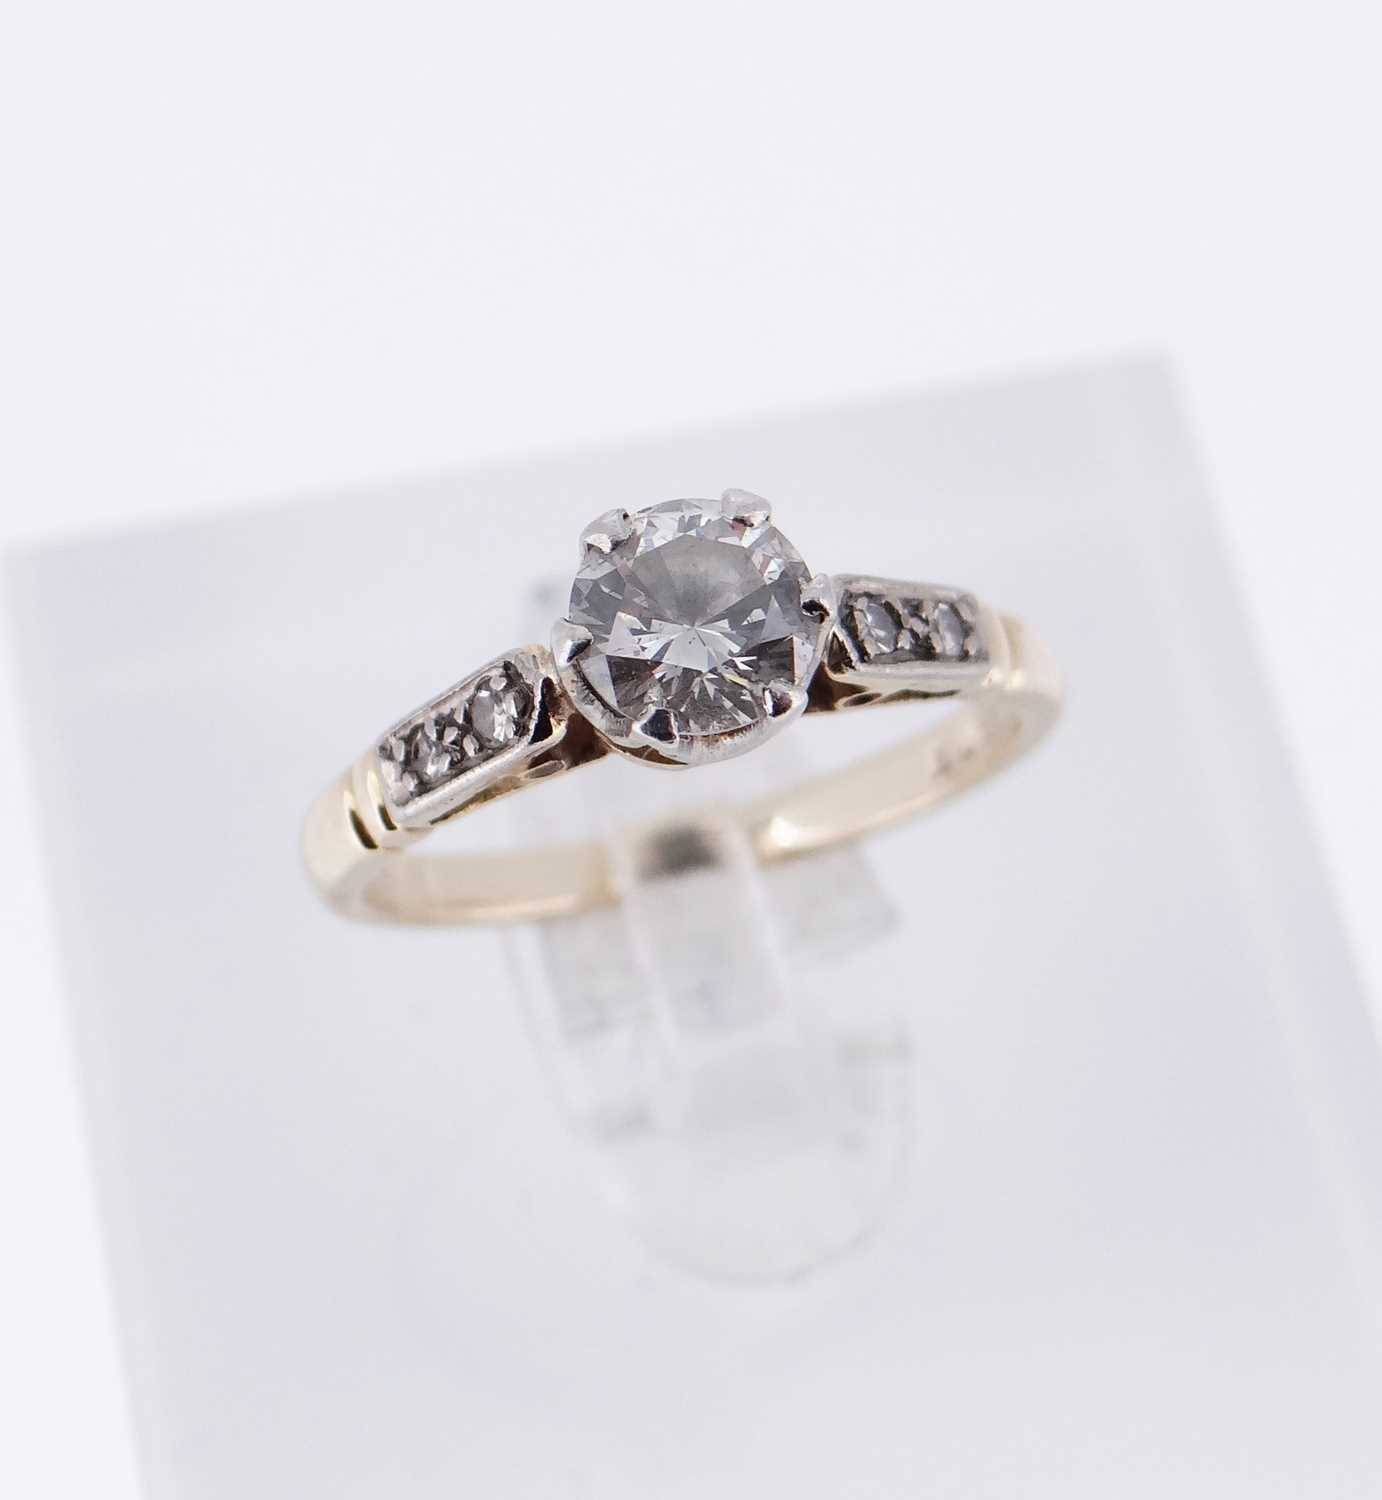 18CT GOLD & PLATINUM DIAMOND RING, the central stone 0.4cts approx., ring size K, 2.4gms Provenance: